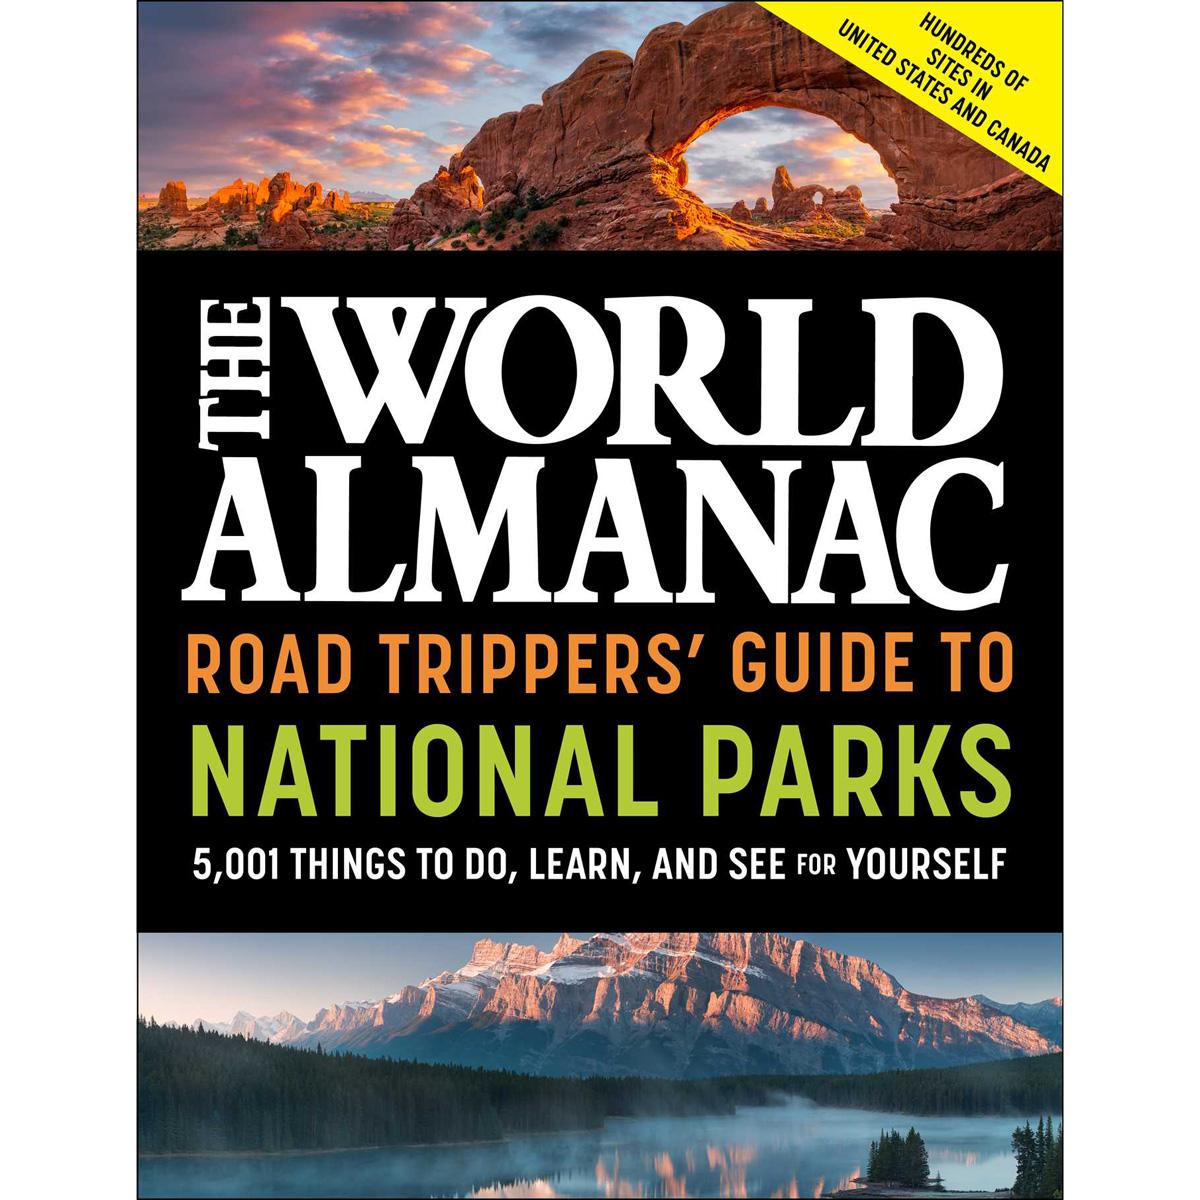 The World Almanac Road Trippers Guide to National Parks eBook for $1.99